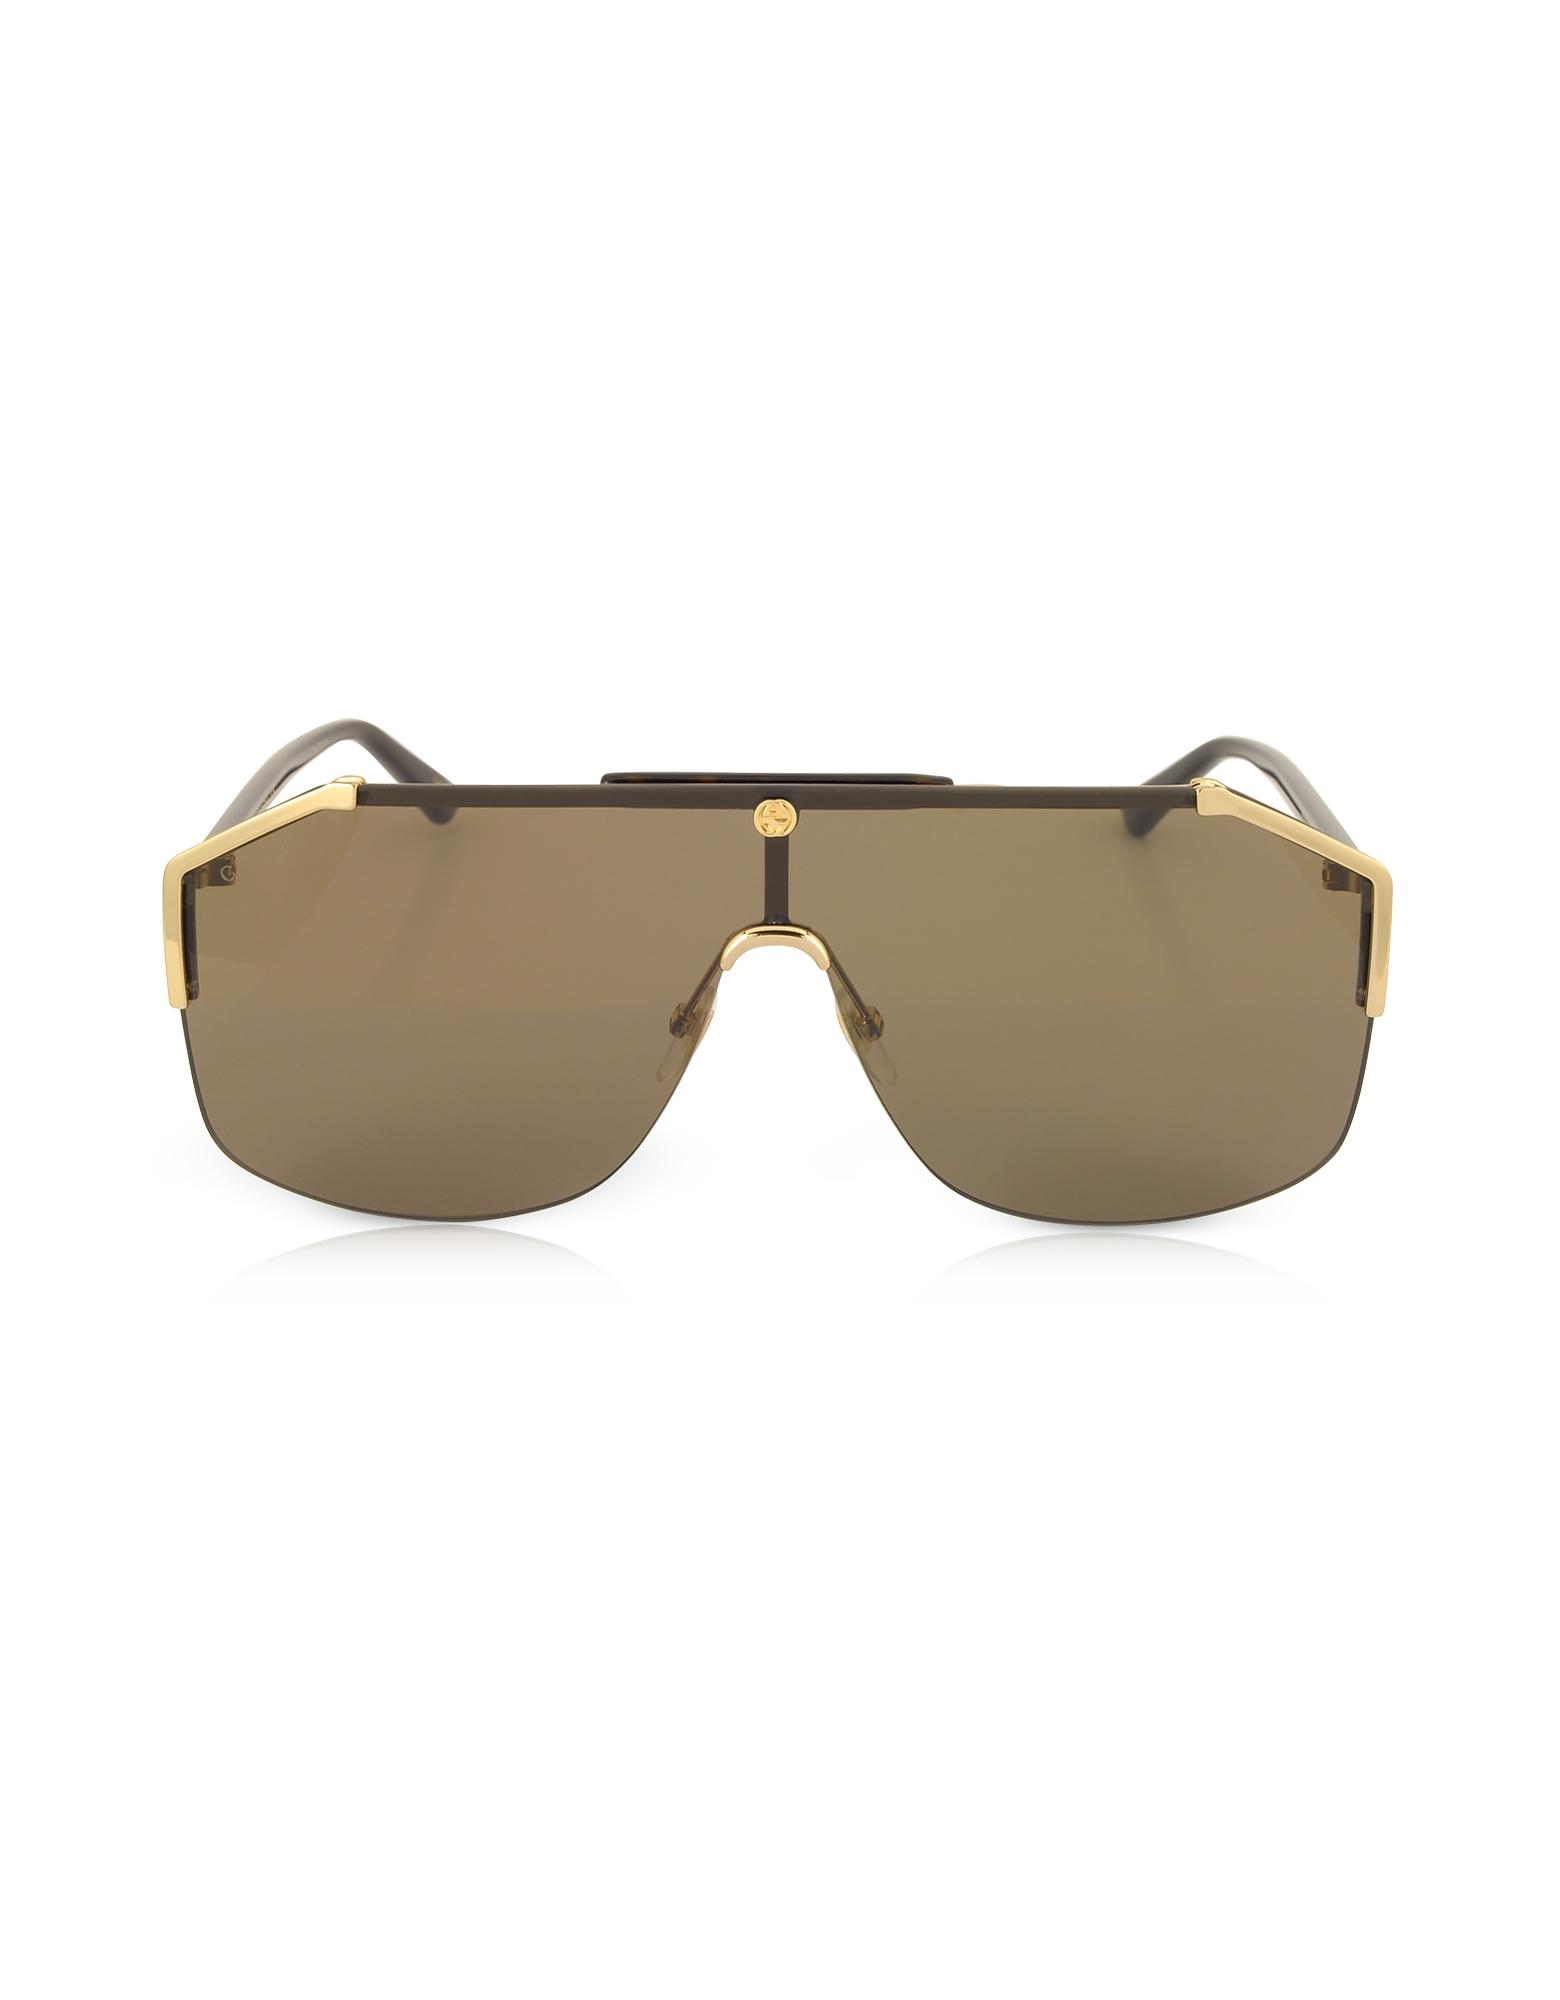 Gucci Gg0291s Rectangular-frame Gold Metal Sunglasses In Gold/brown ...